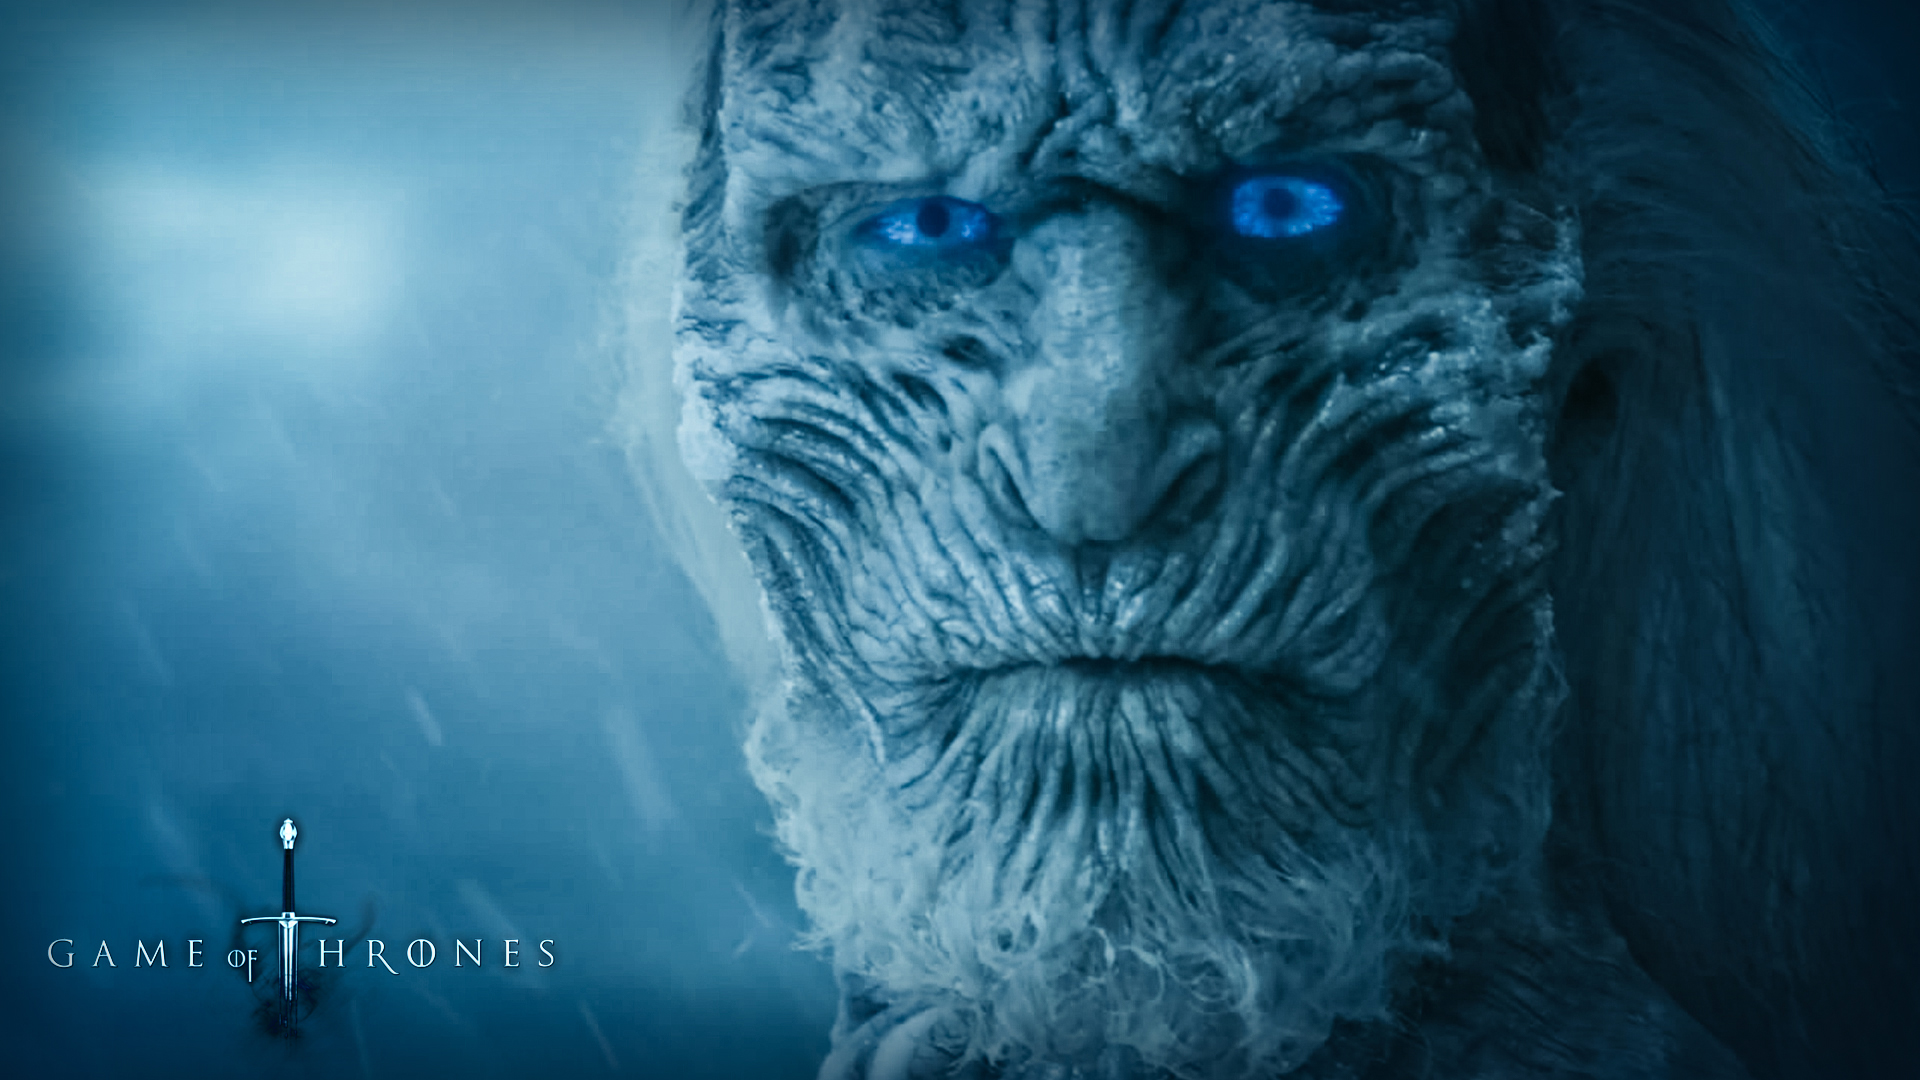 Some Awesome Game Of Thrones Wallpaper